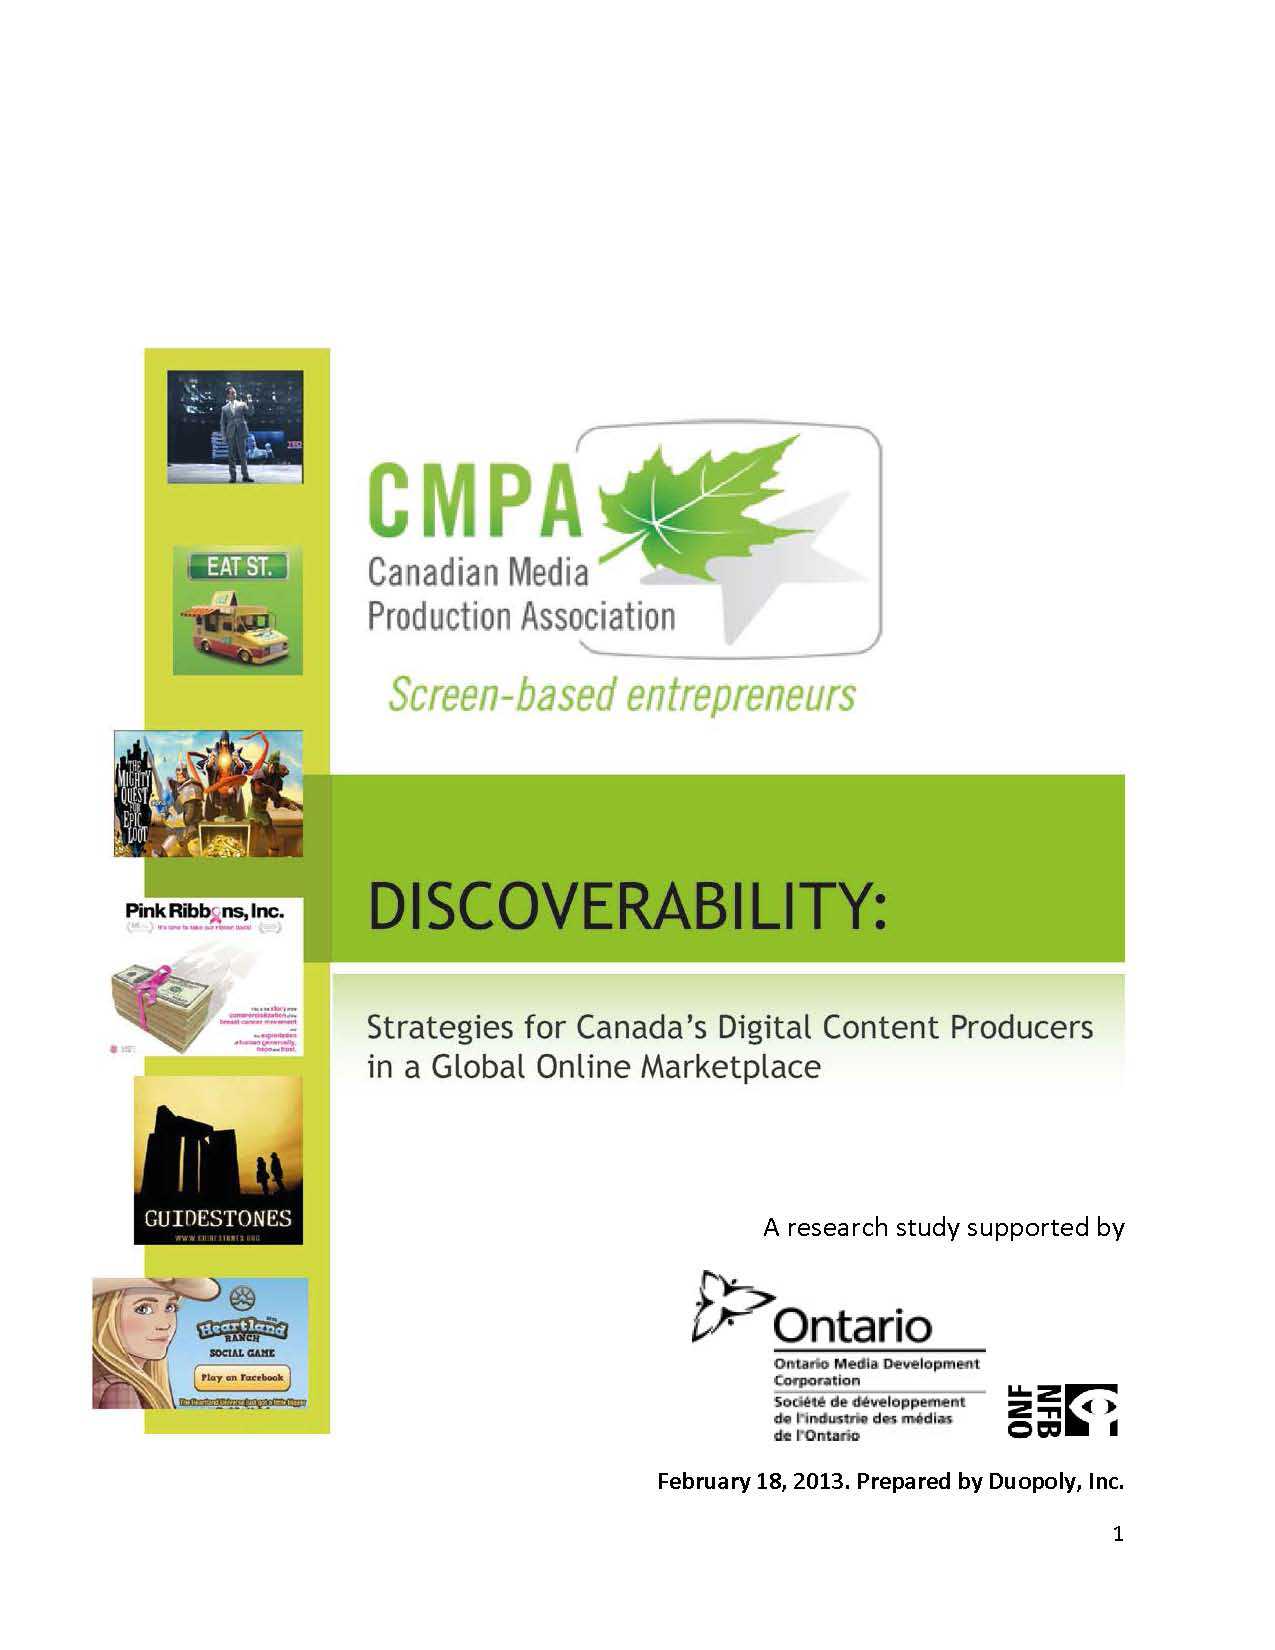 Discoverability: Strategies for Canada’s Digital Content Producers in a Global Online Marketplace